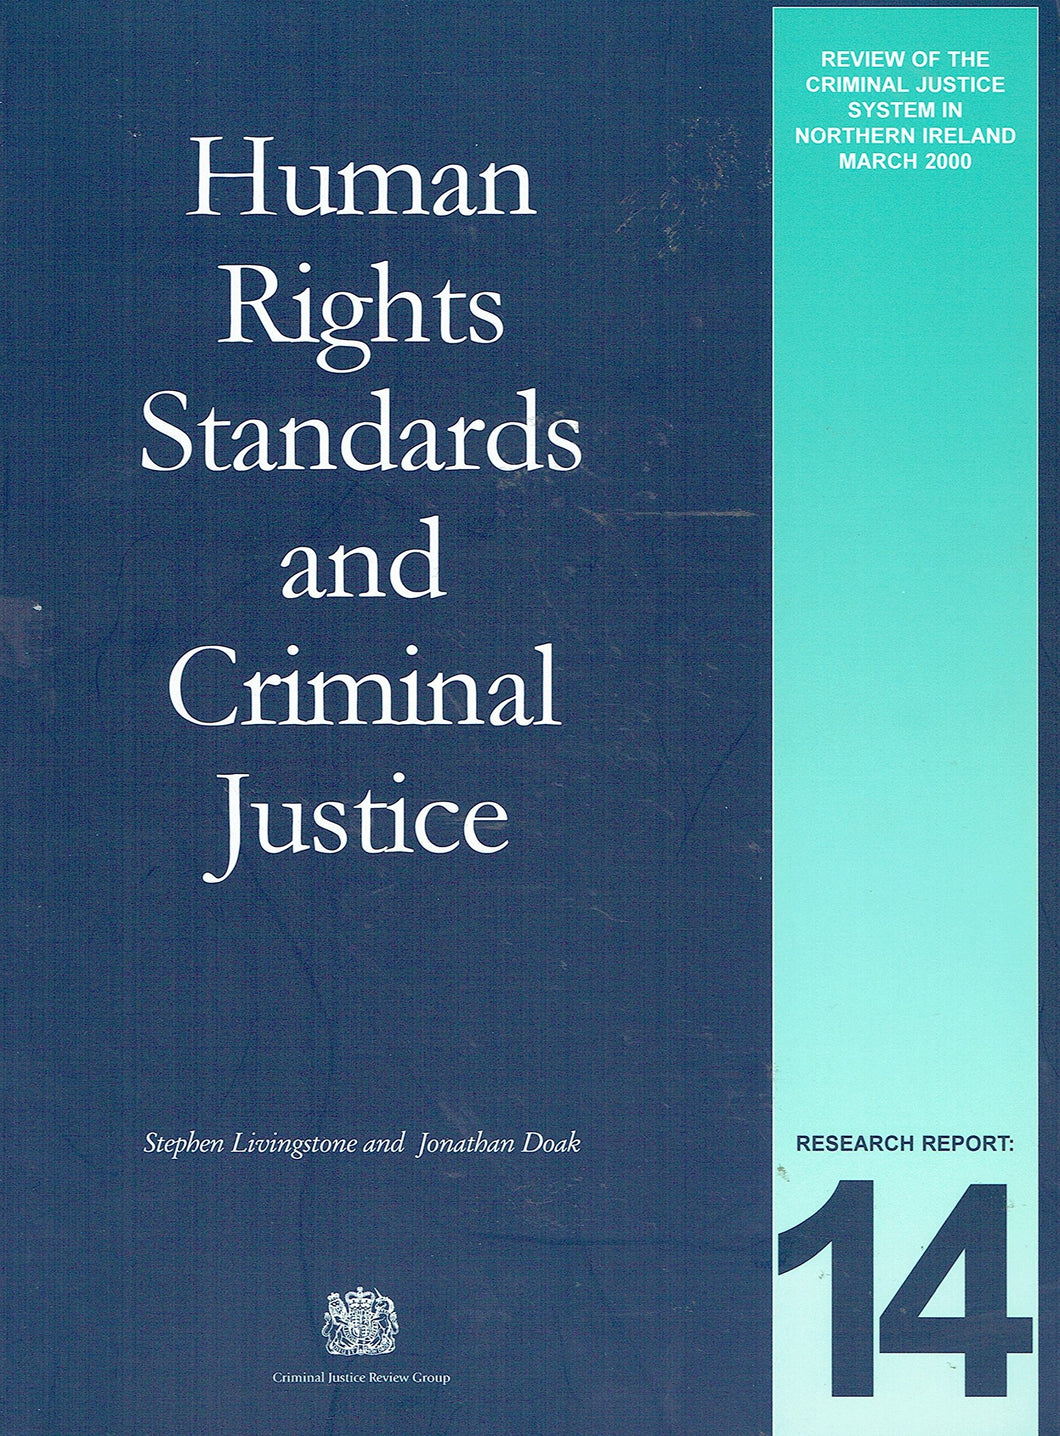 Human Rights Standards and Criminal Justice - Review of the Criminal Justice System in Northern Ireland, March 2000 - Research Report: 14